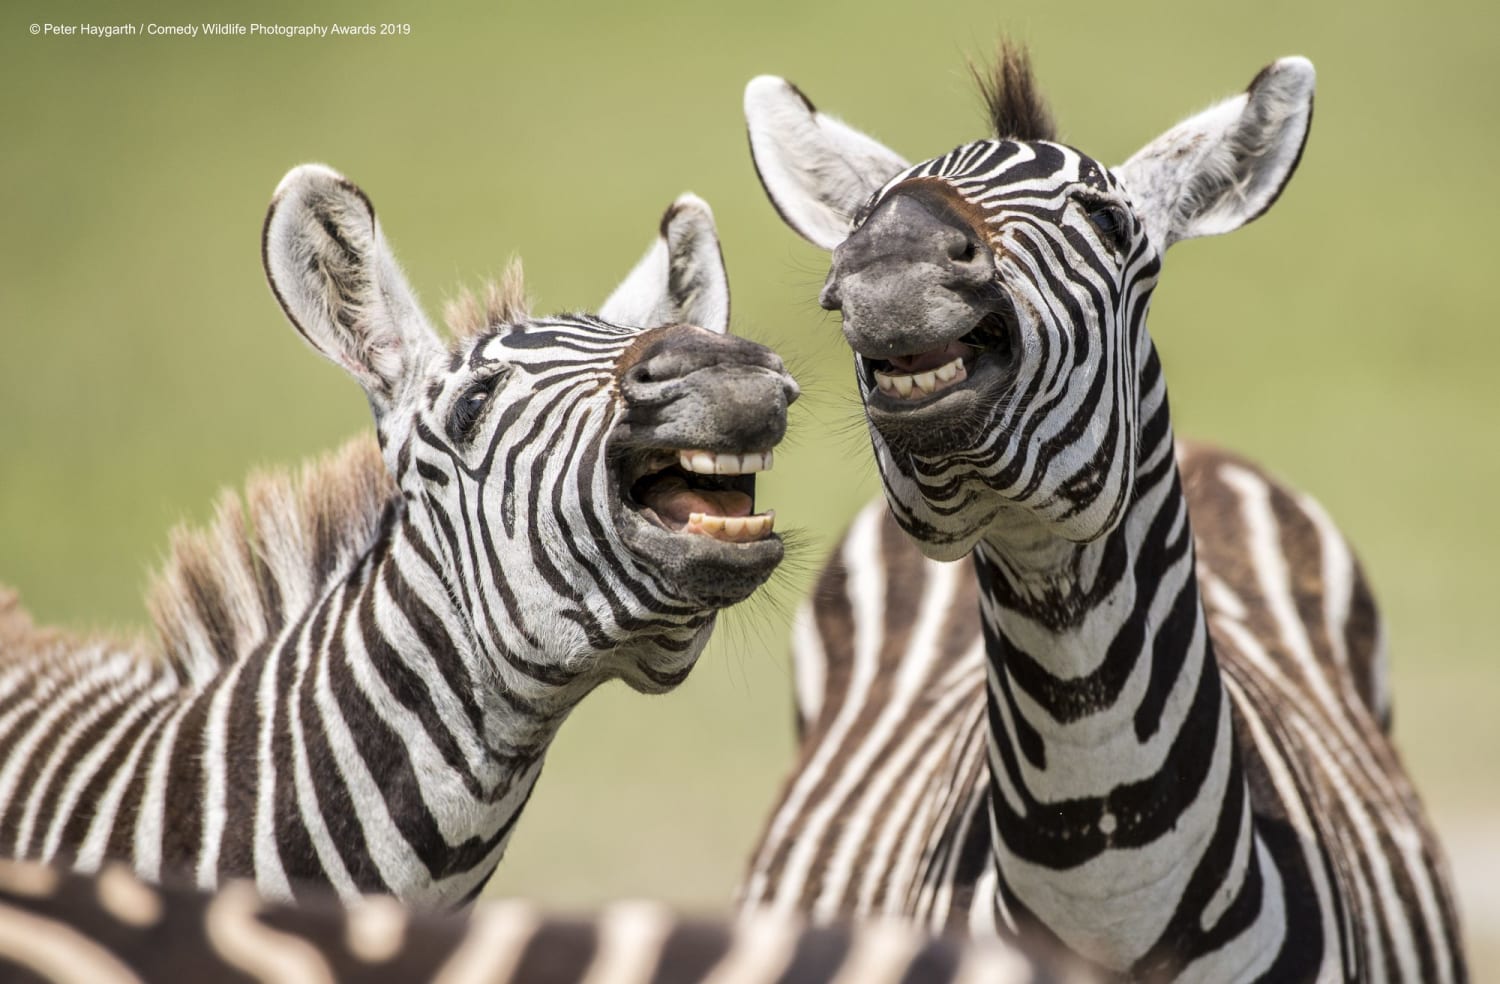 Comedy Wildlife Photography Awards finalists show the bright and hilarious side of animal life